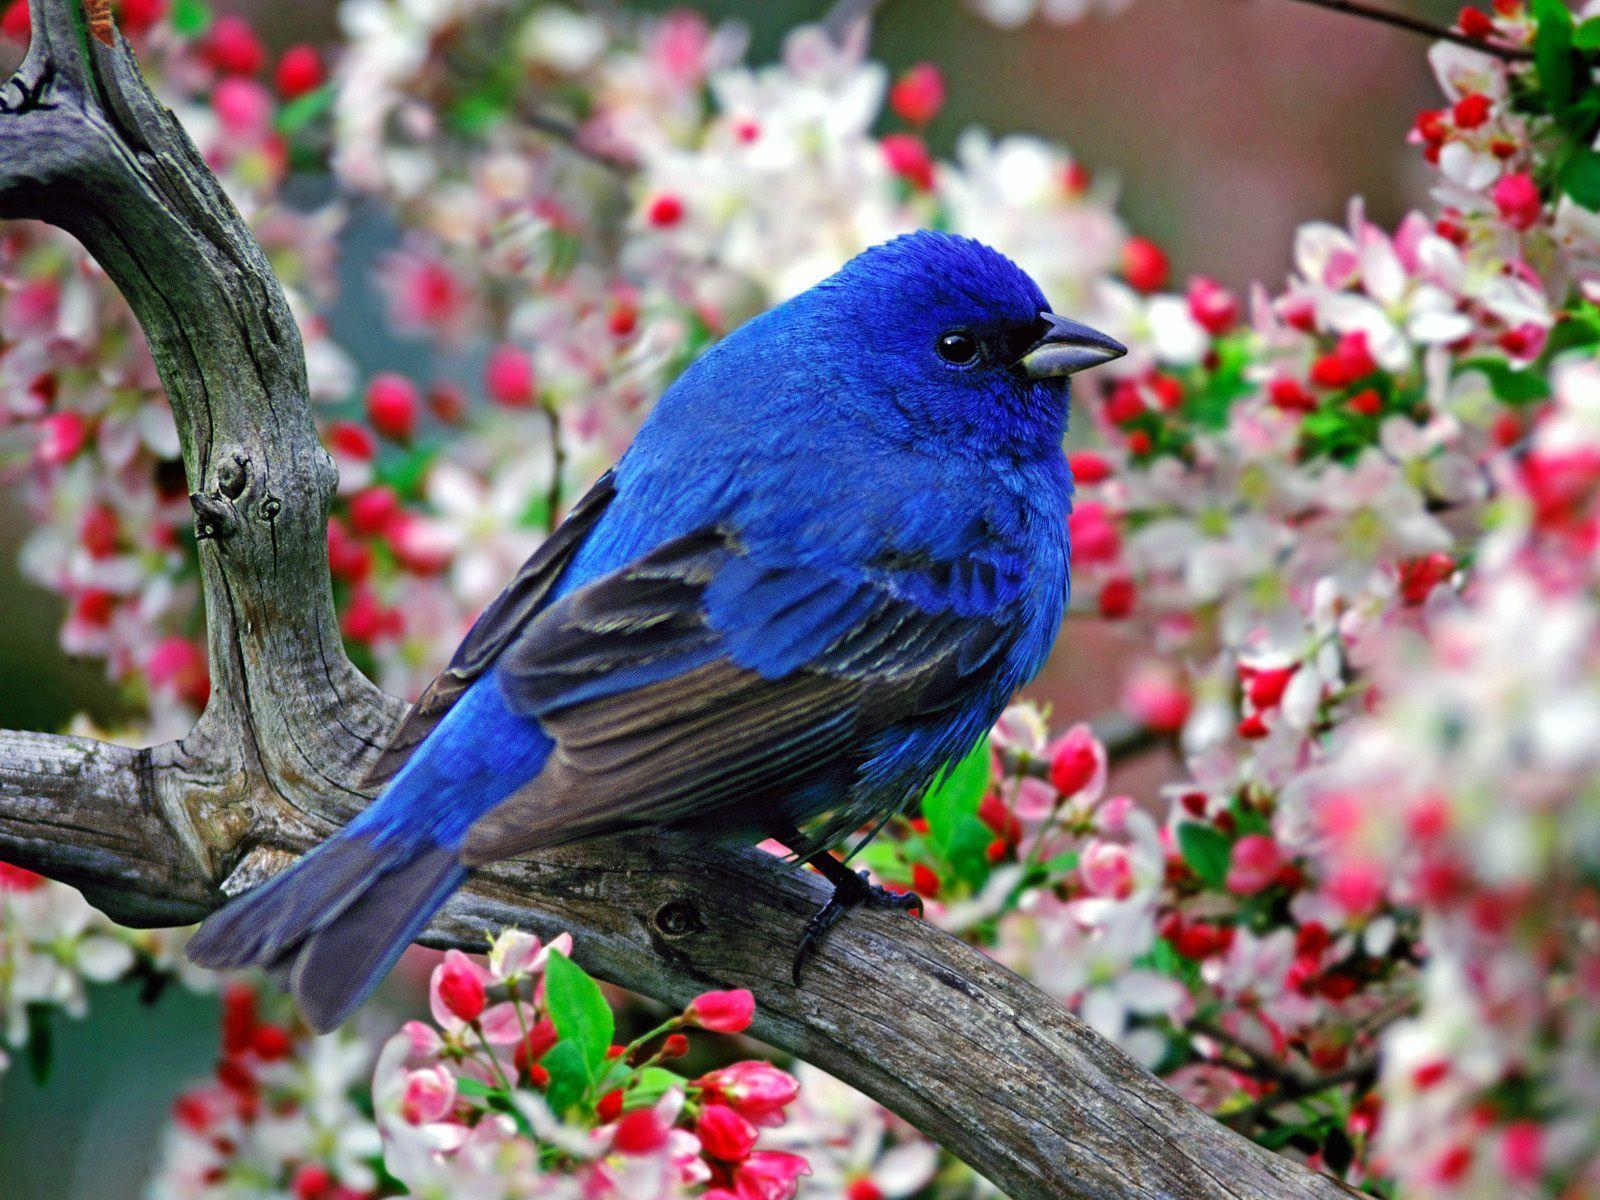 Blue bird wallpaper and image, picture, photo